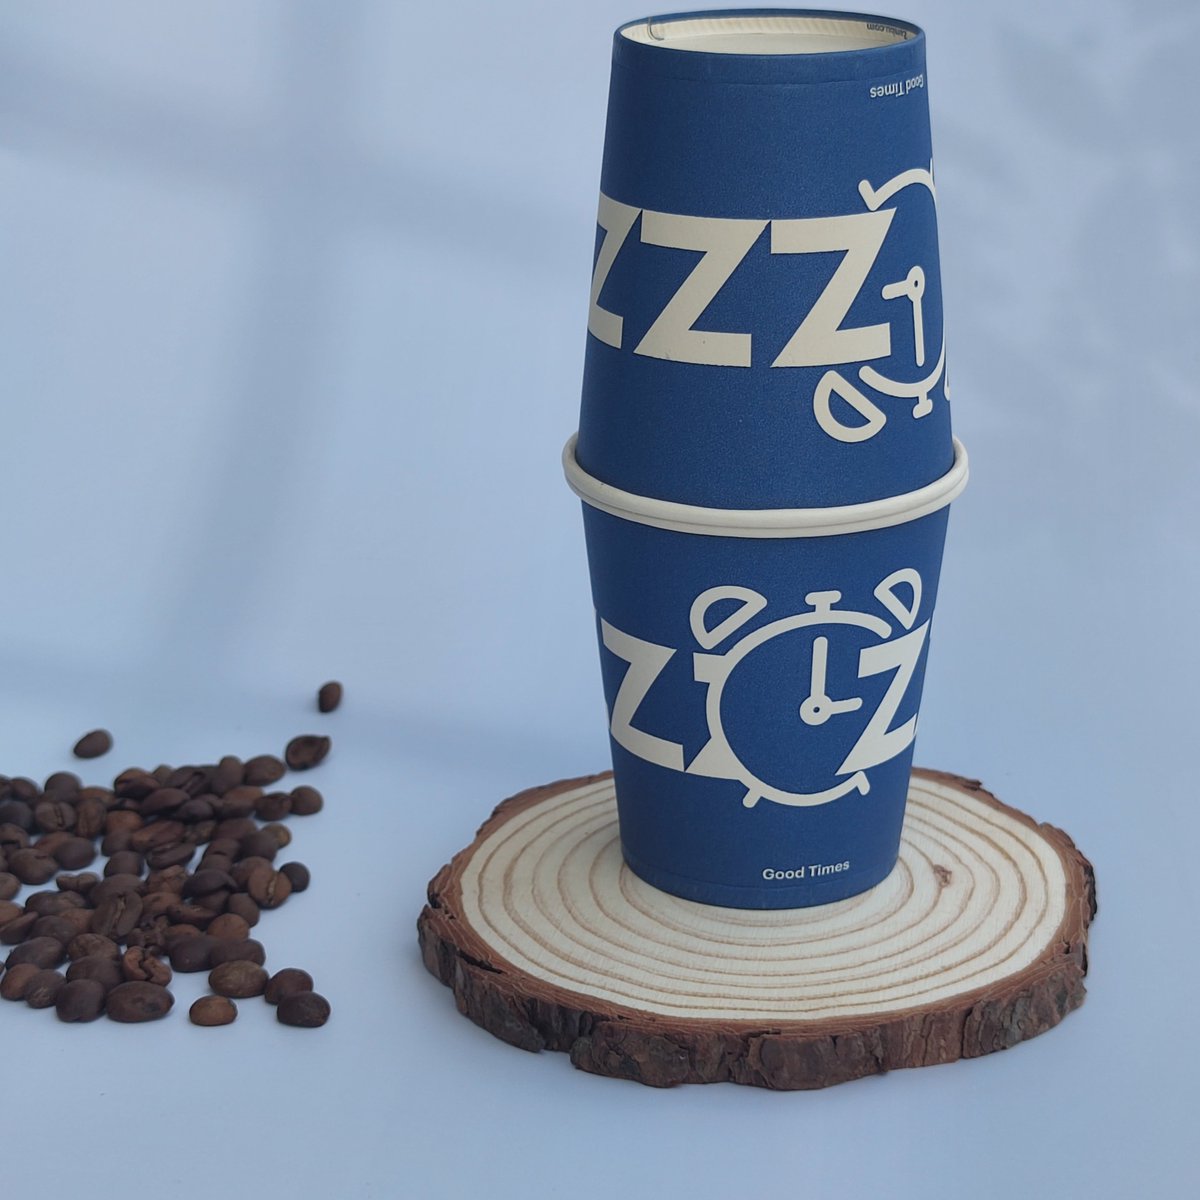 Start your day right with our new product - the Blue Alarm Clock Paper Cup. A professional choice for those who appreciate quality and style. Drink your favorite beverage while enjoying the unique design. 🌟 Grab yours now! ✨ #BlueAlarmClockPaperCup #QualityAndStyle #morning